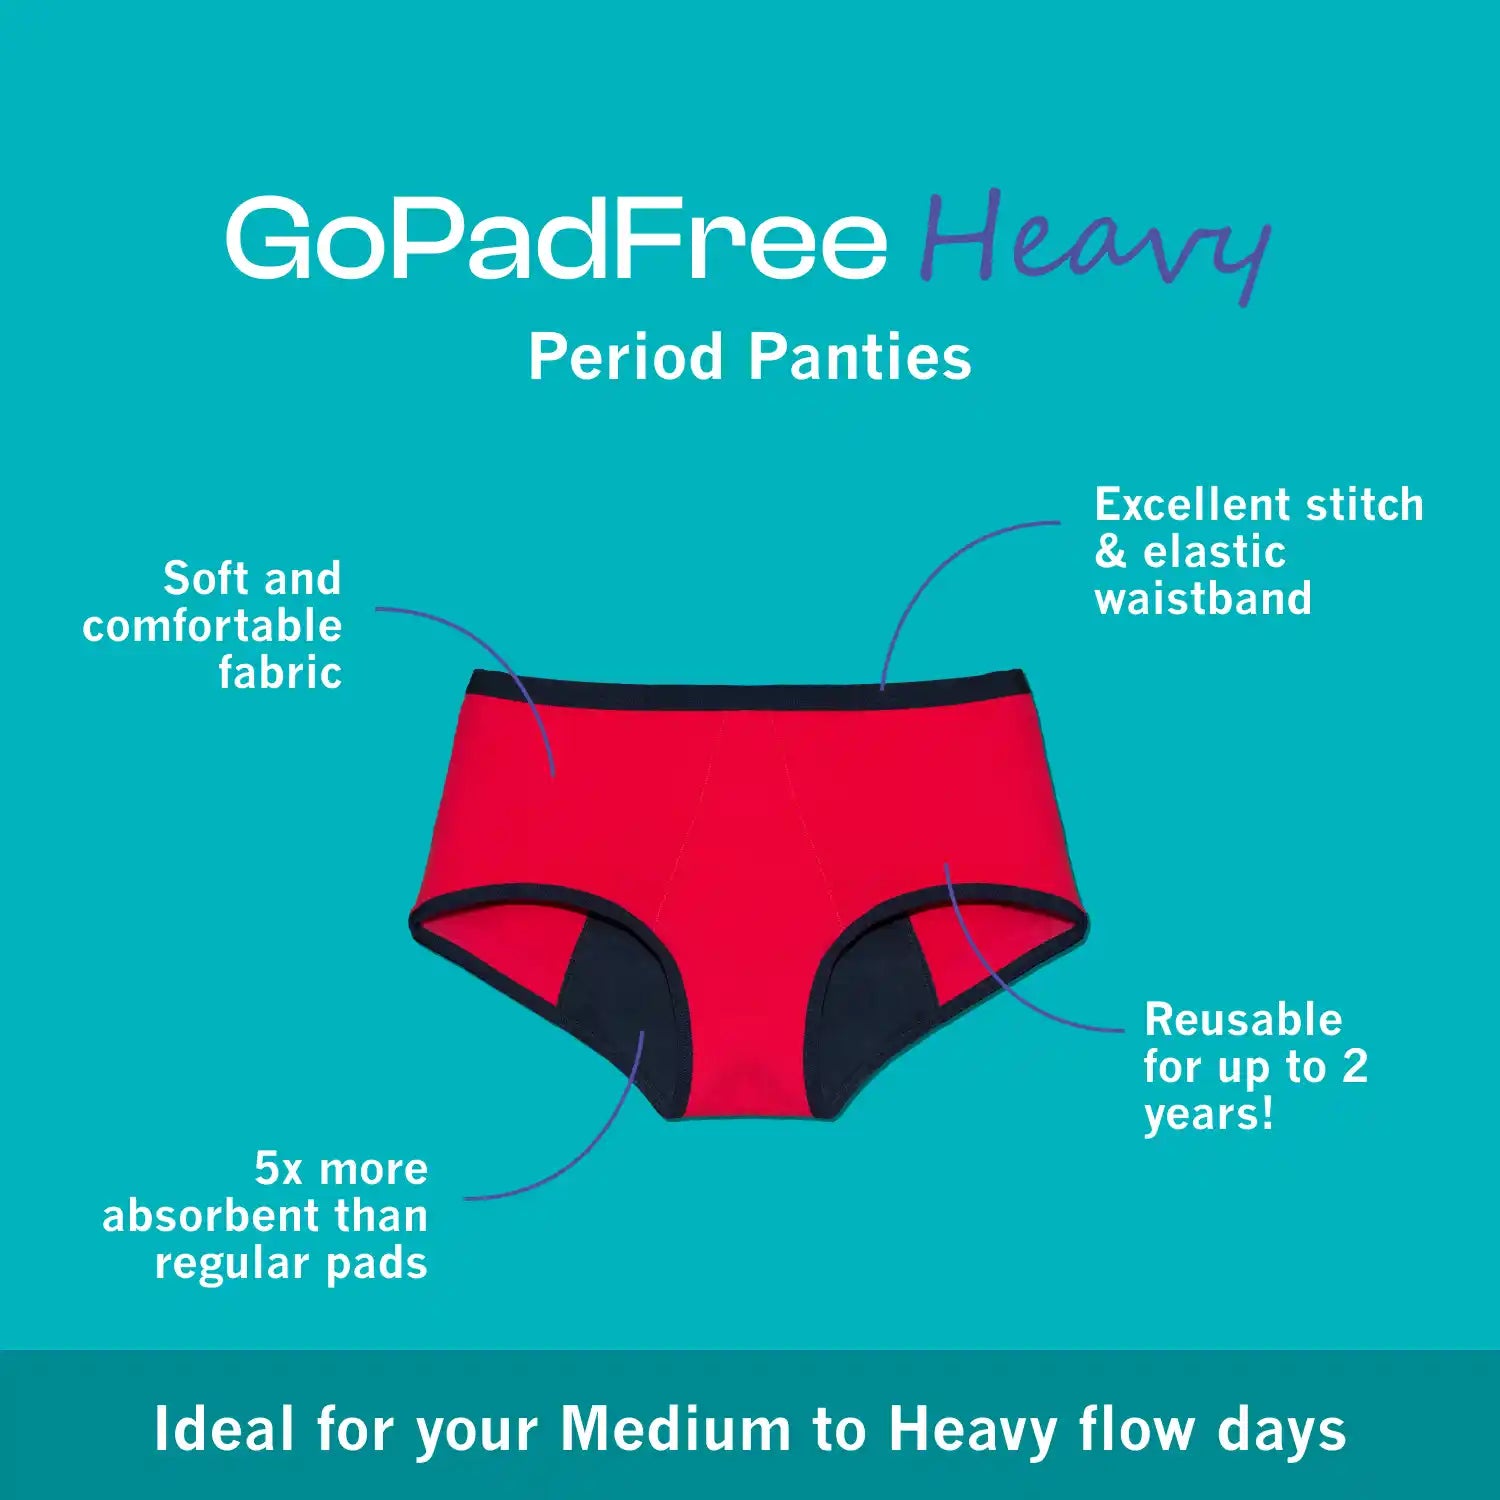 The Best Stores for Period Panties, Reusable Pads in the PH